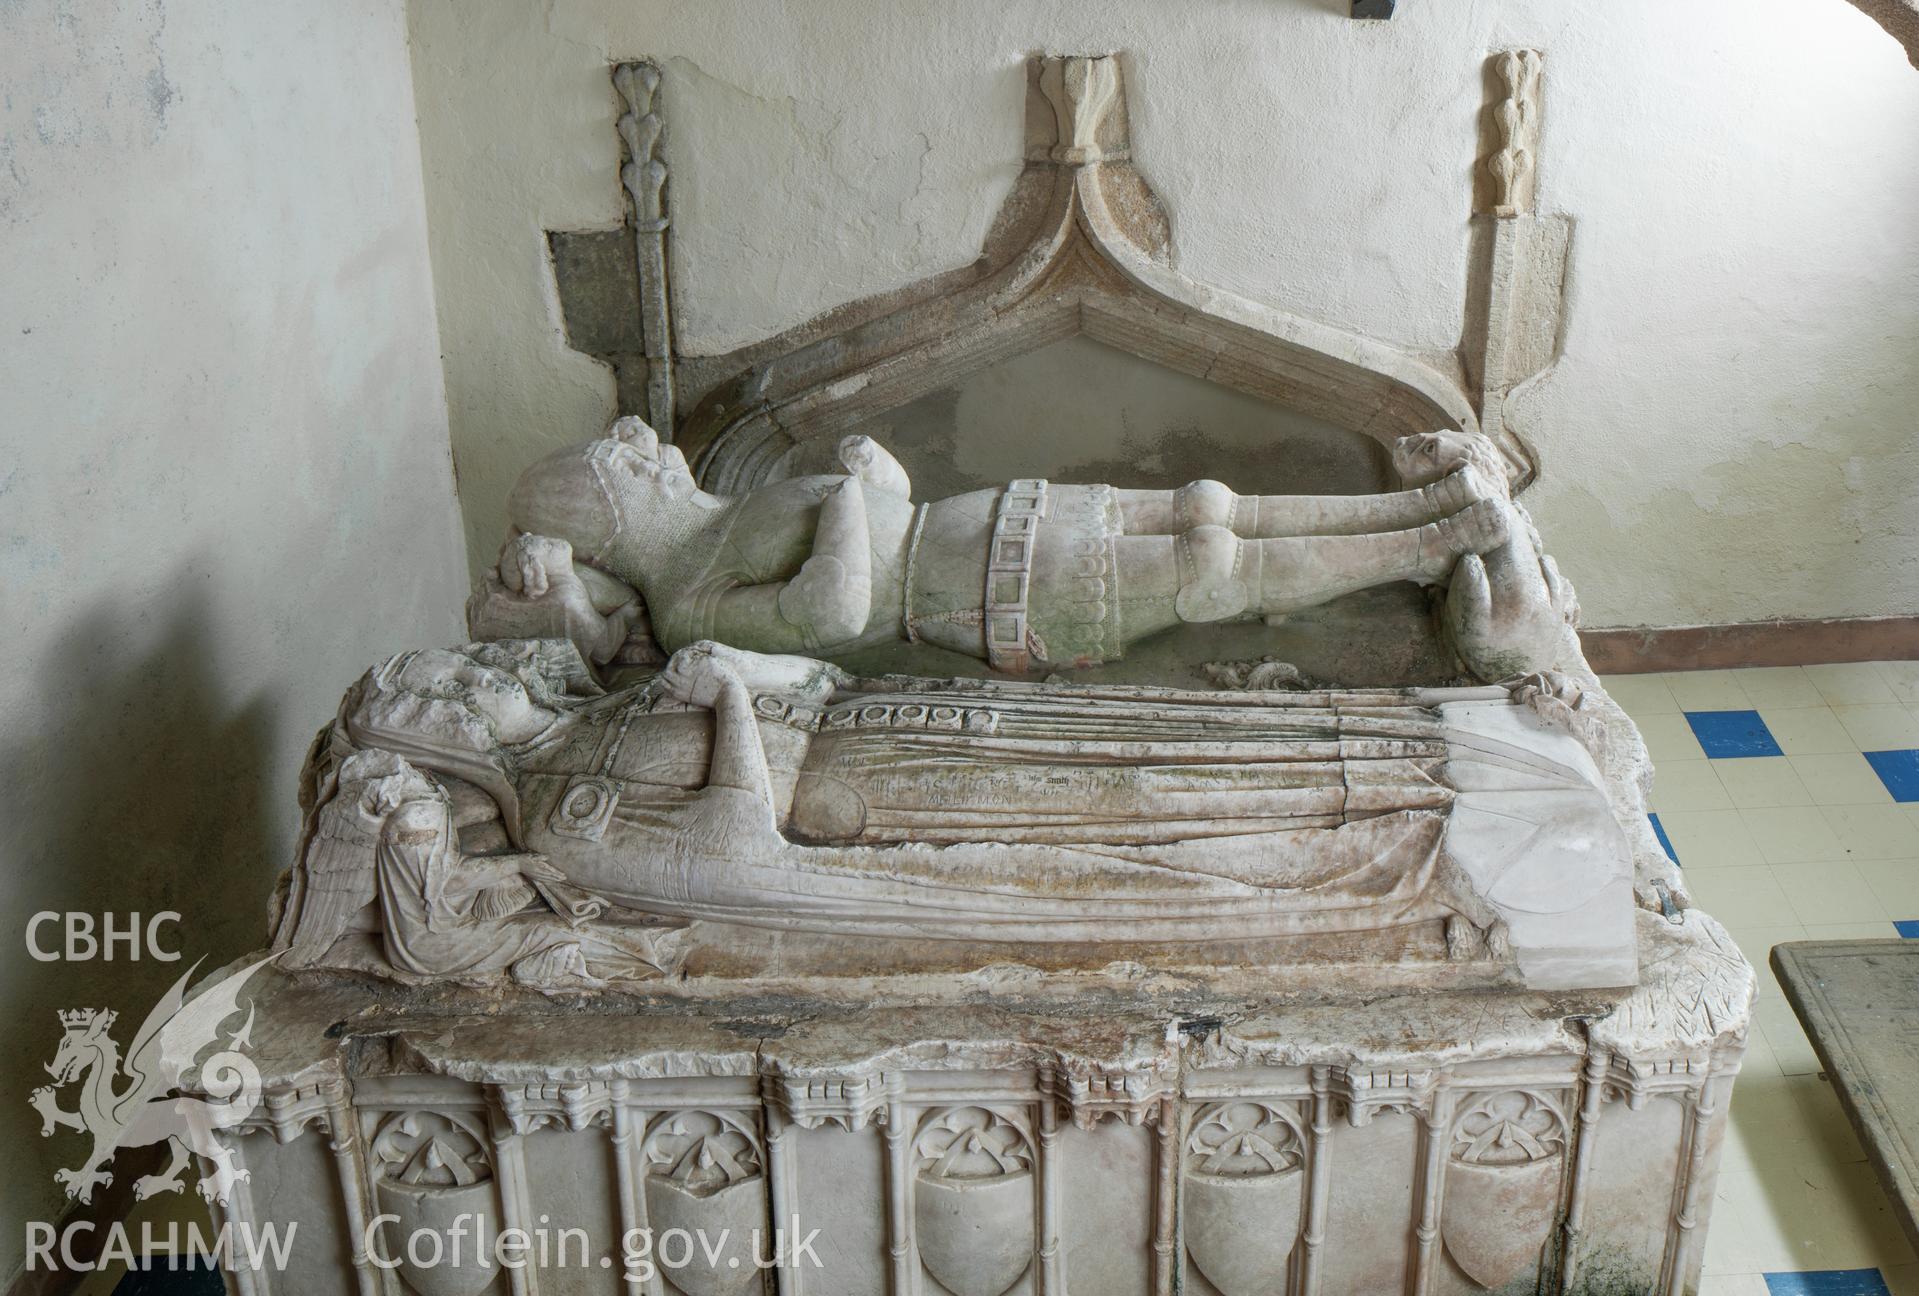 Tudor tomb, from the south